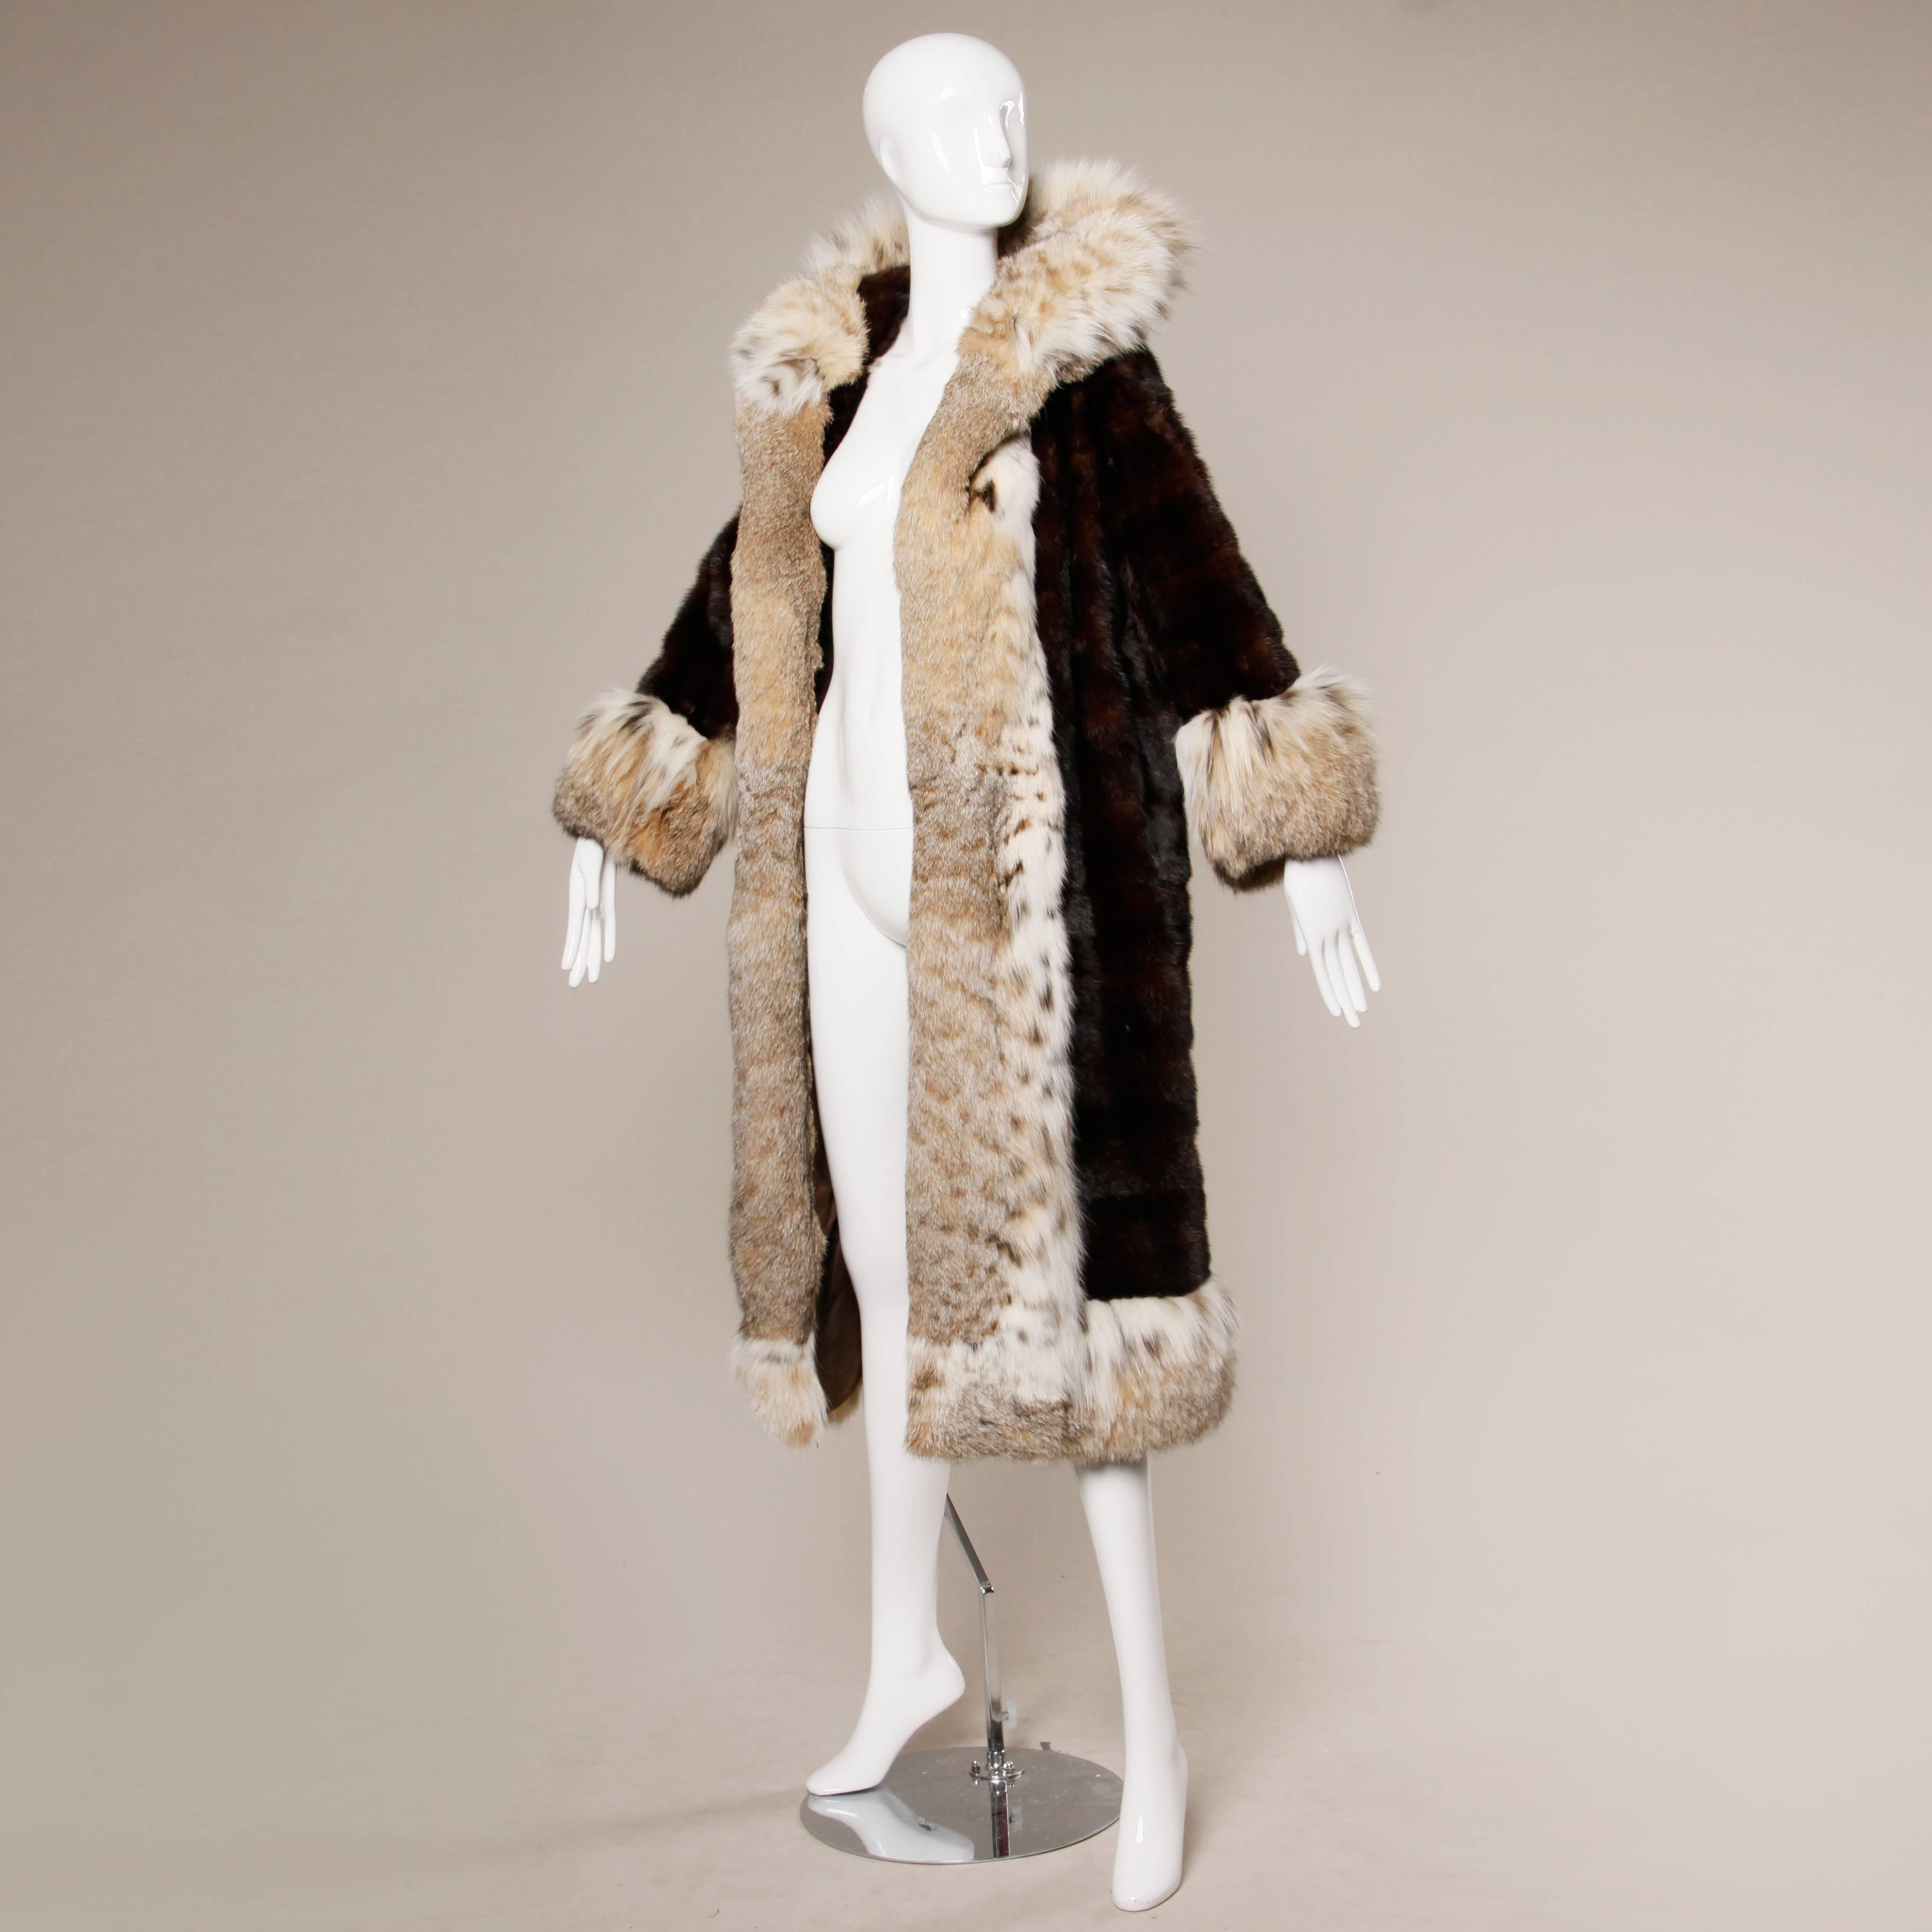 Reduced from $3500! Absolutely stunning horizontal mahogany mink fur coat with luxe spotted Lynx fur trim, cuffs and pop up collar. Fur is in excellent condition. Mink is shiny and plush. Lynx is fluffy, full and soft. A gorgeous